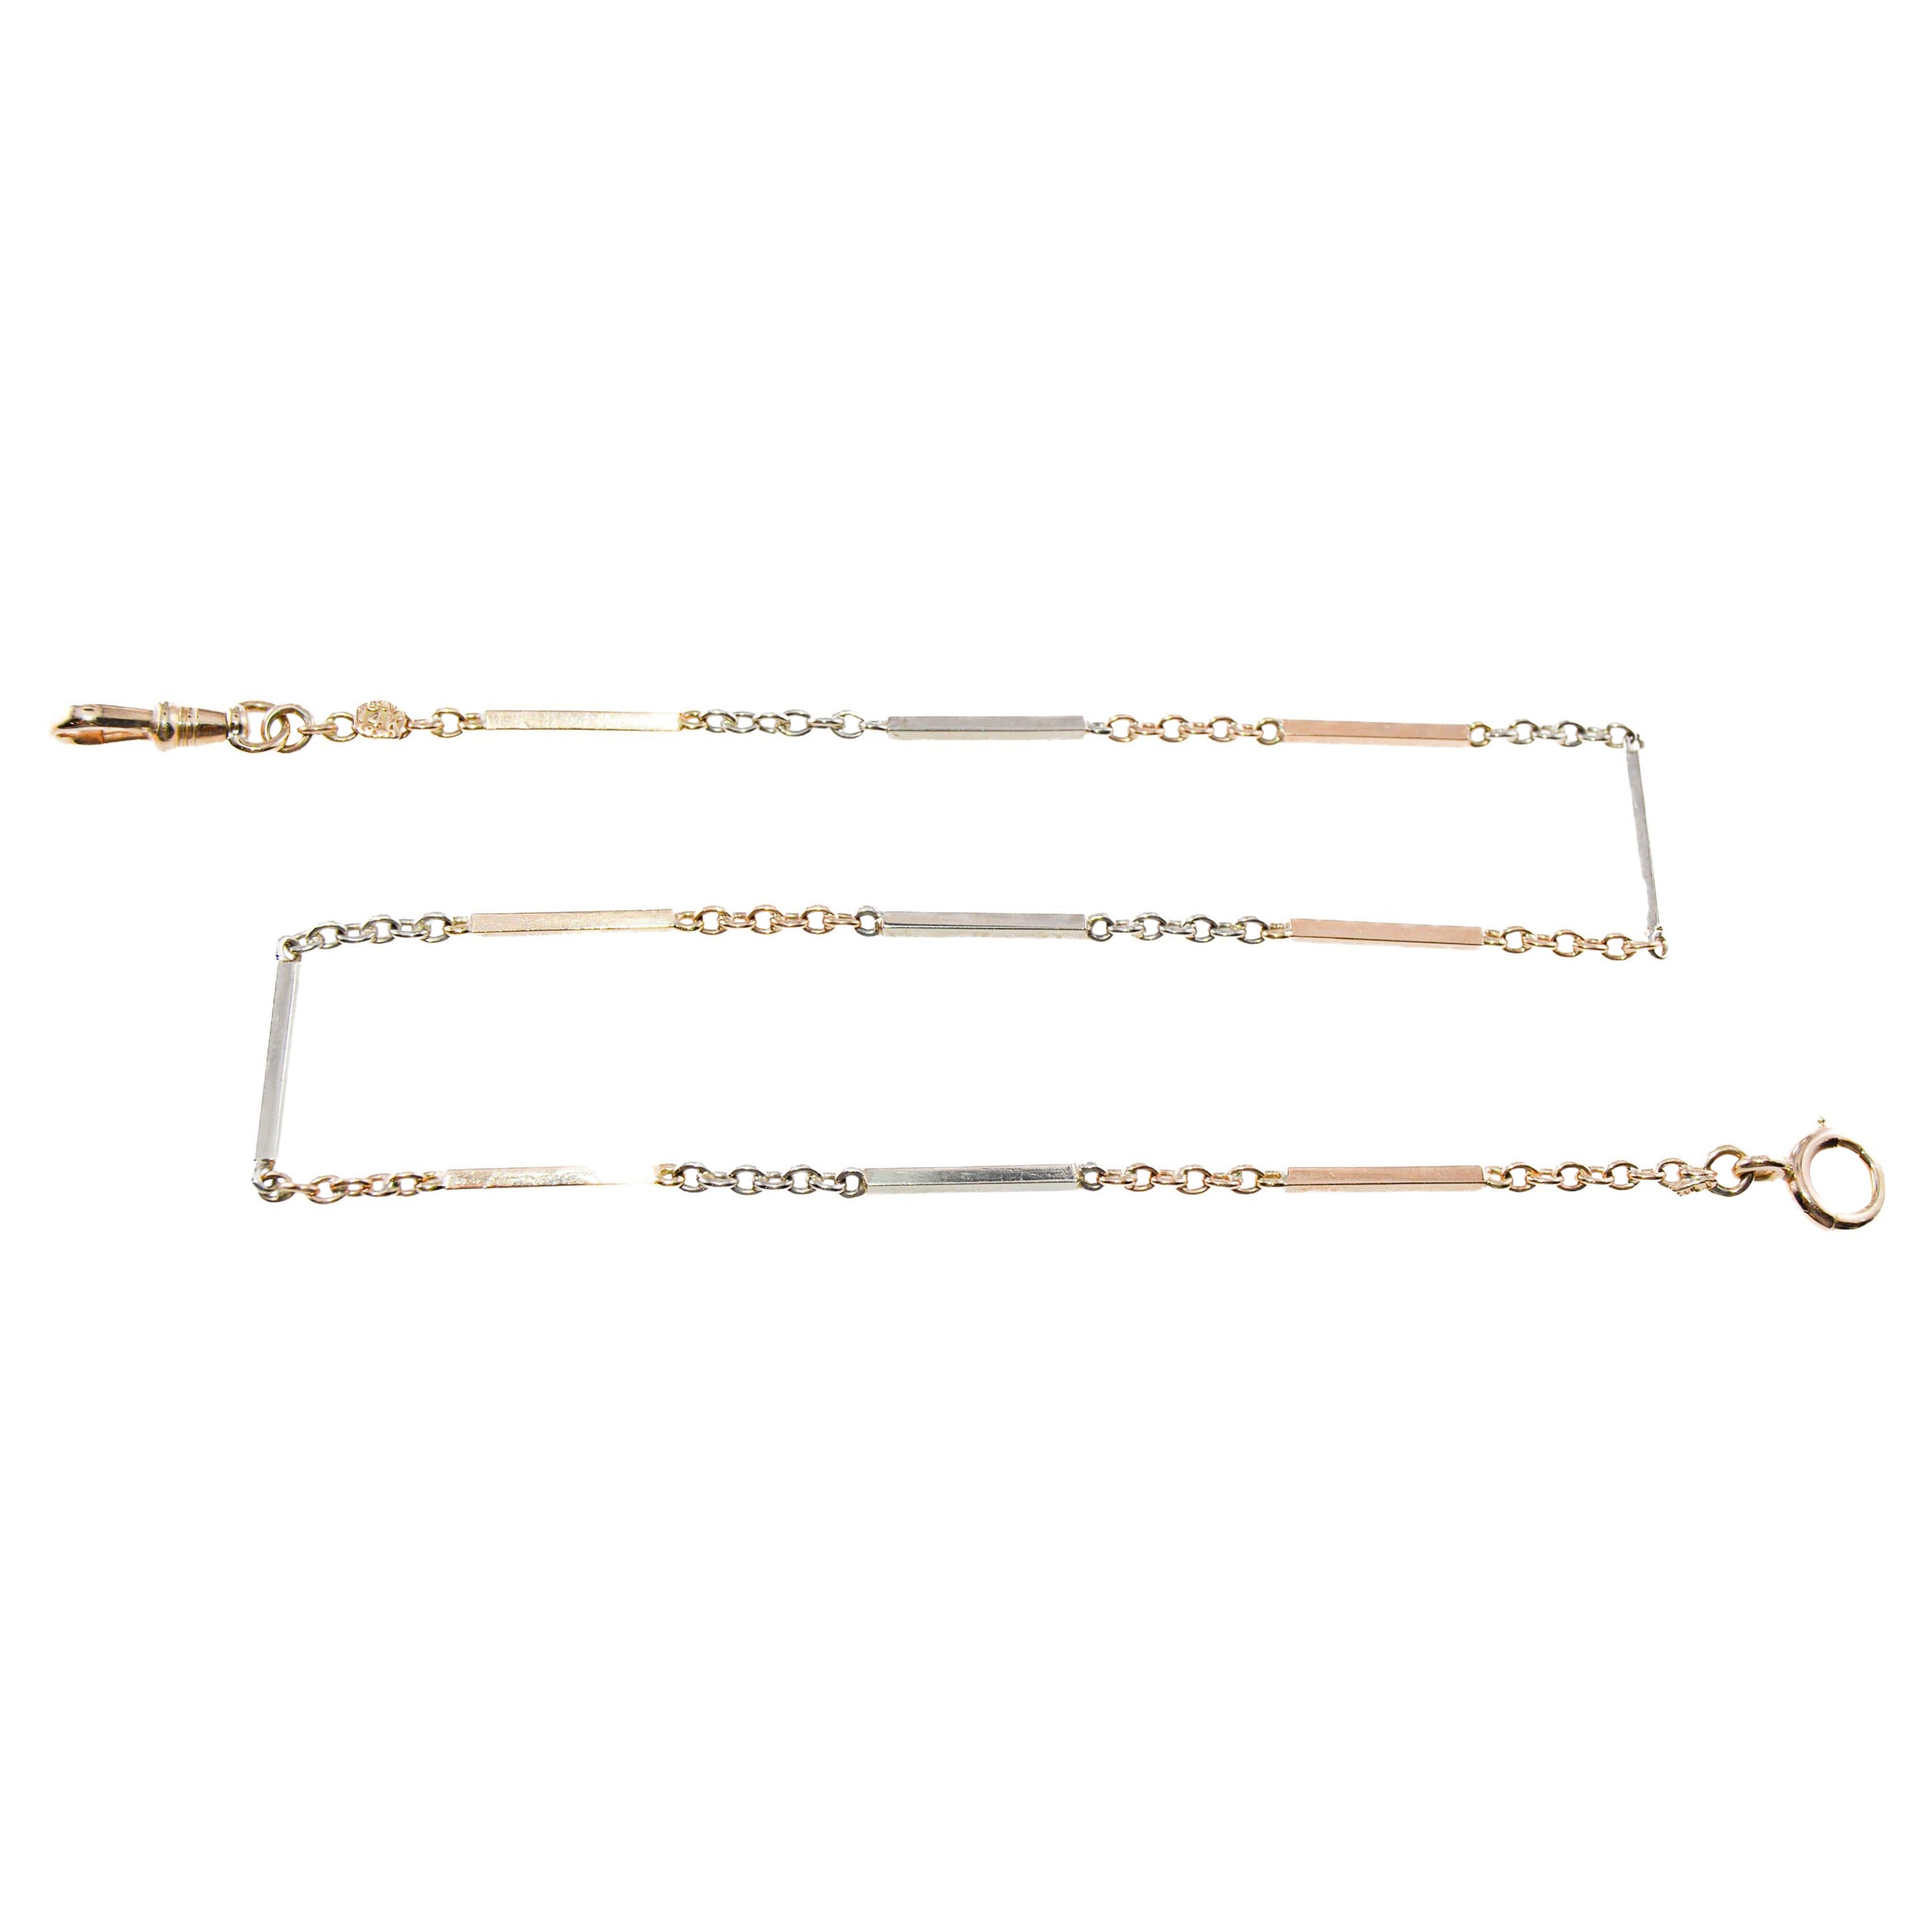 Two Tone 14Kt White & Yellow Gold Necklace, Bracelet or Pocket Watch Chain 1930s For Sale